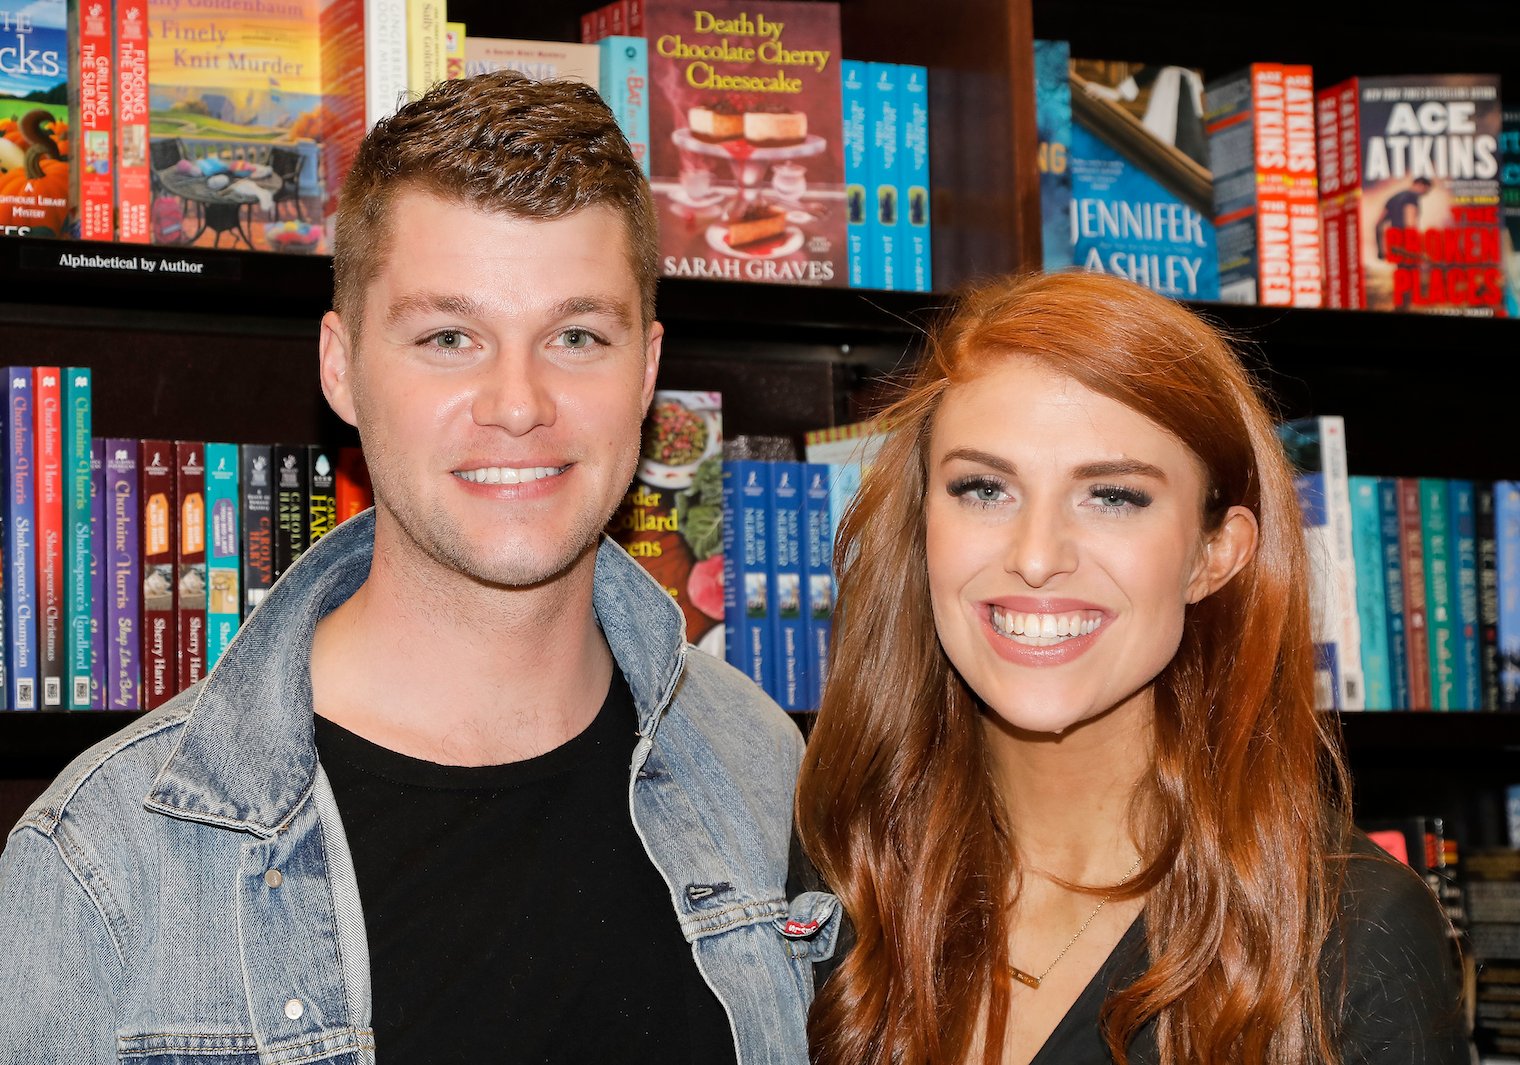 Jeremy Roloff and Audrey Roloff from 'Little People, Big World' smiling at a book signing